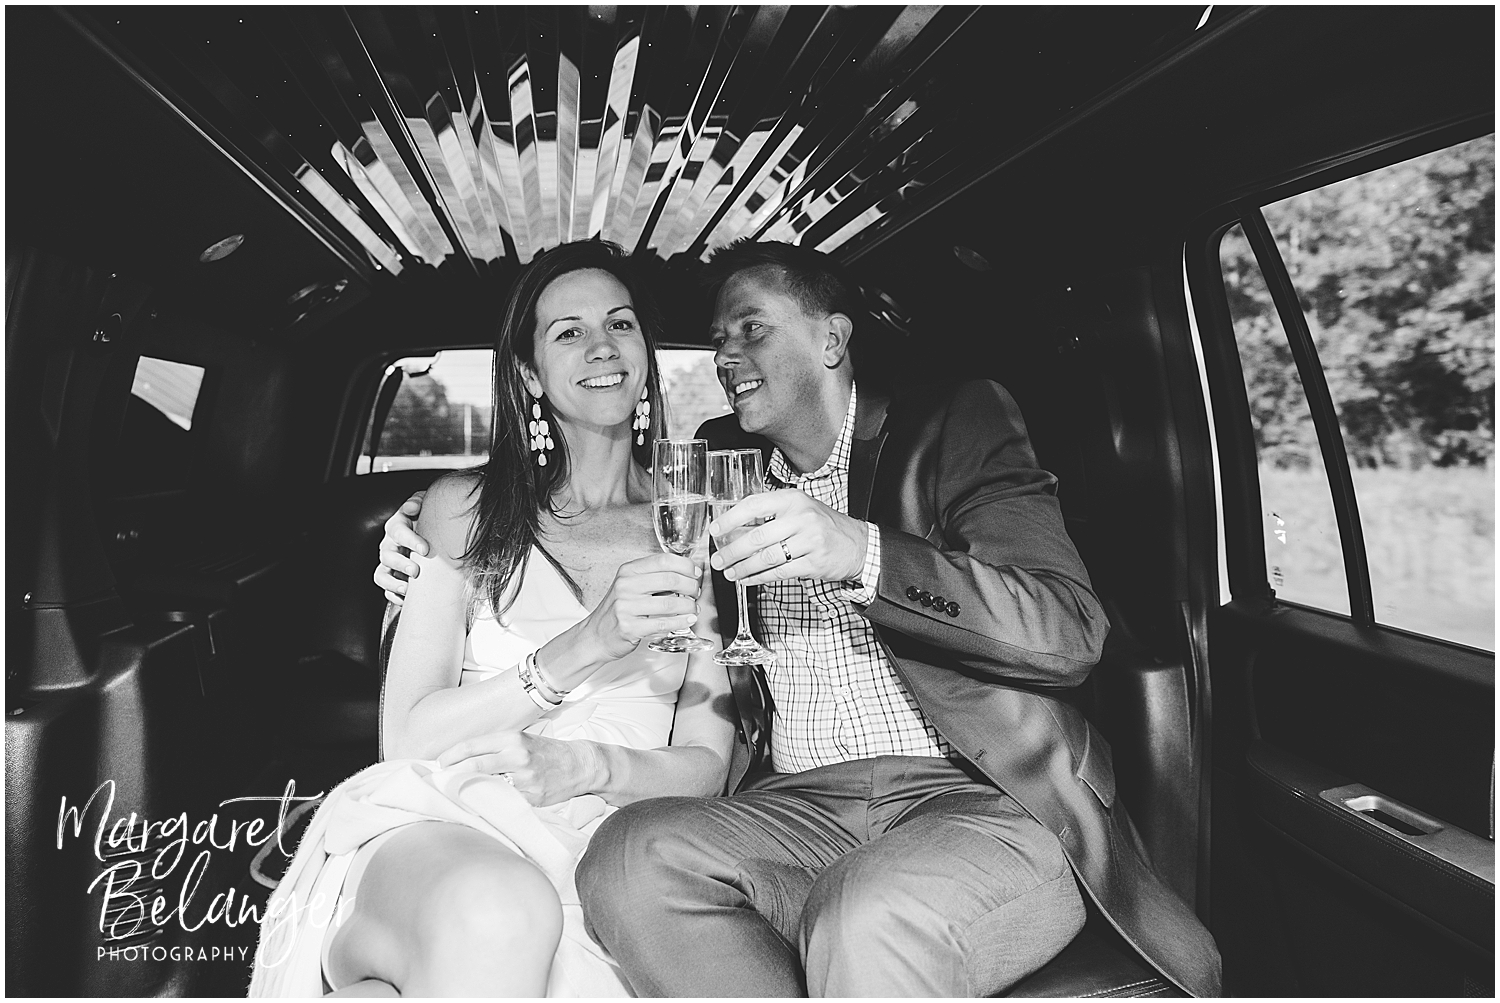 A bride and groom toasting with champagne inside a limousine while the bride looks at the camera and the groom looks at the bride.